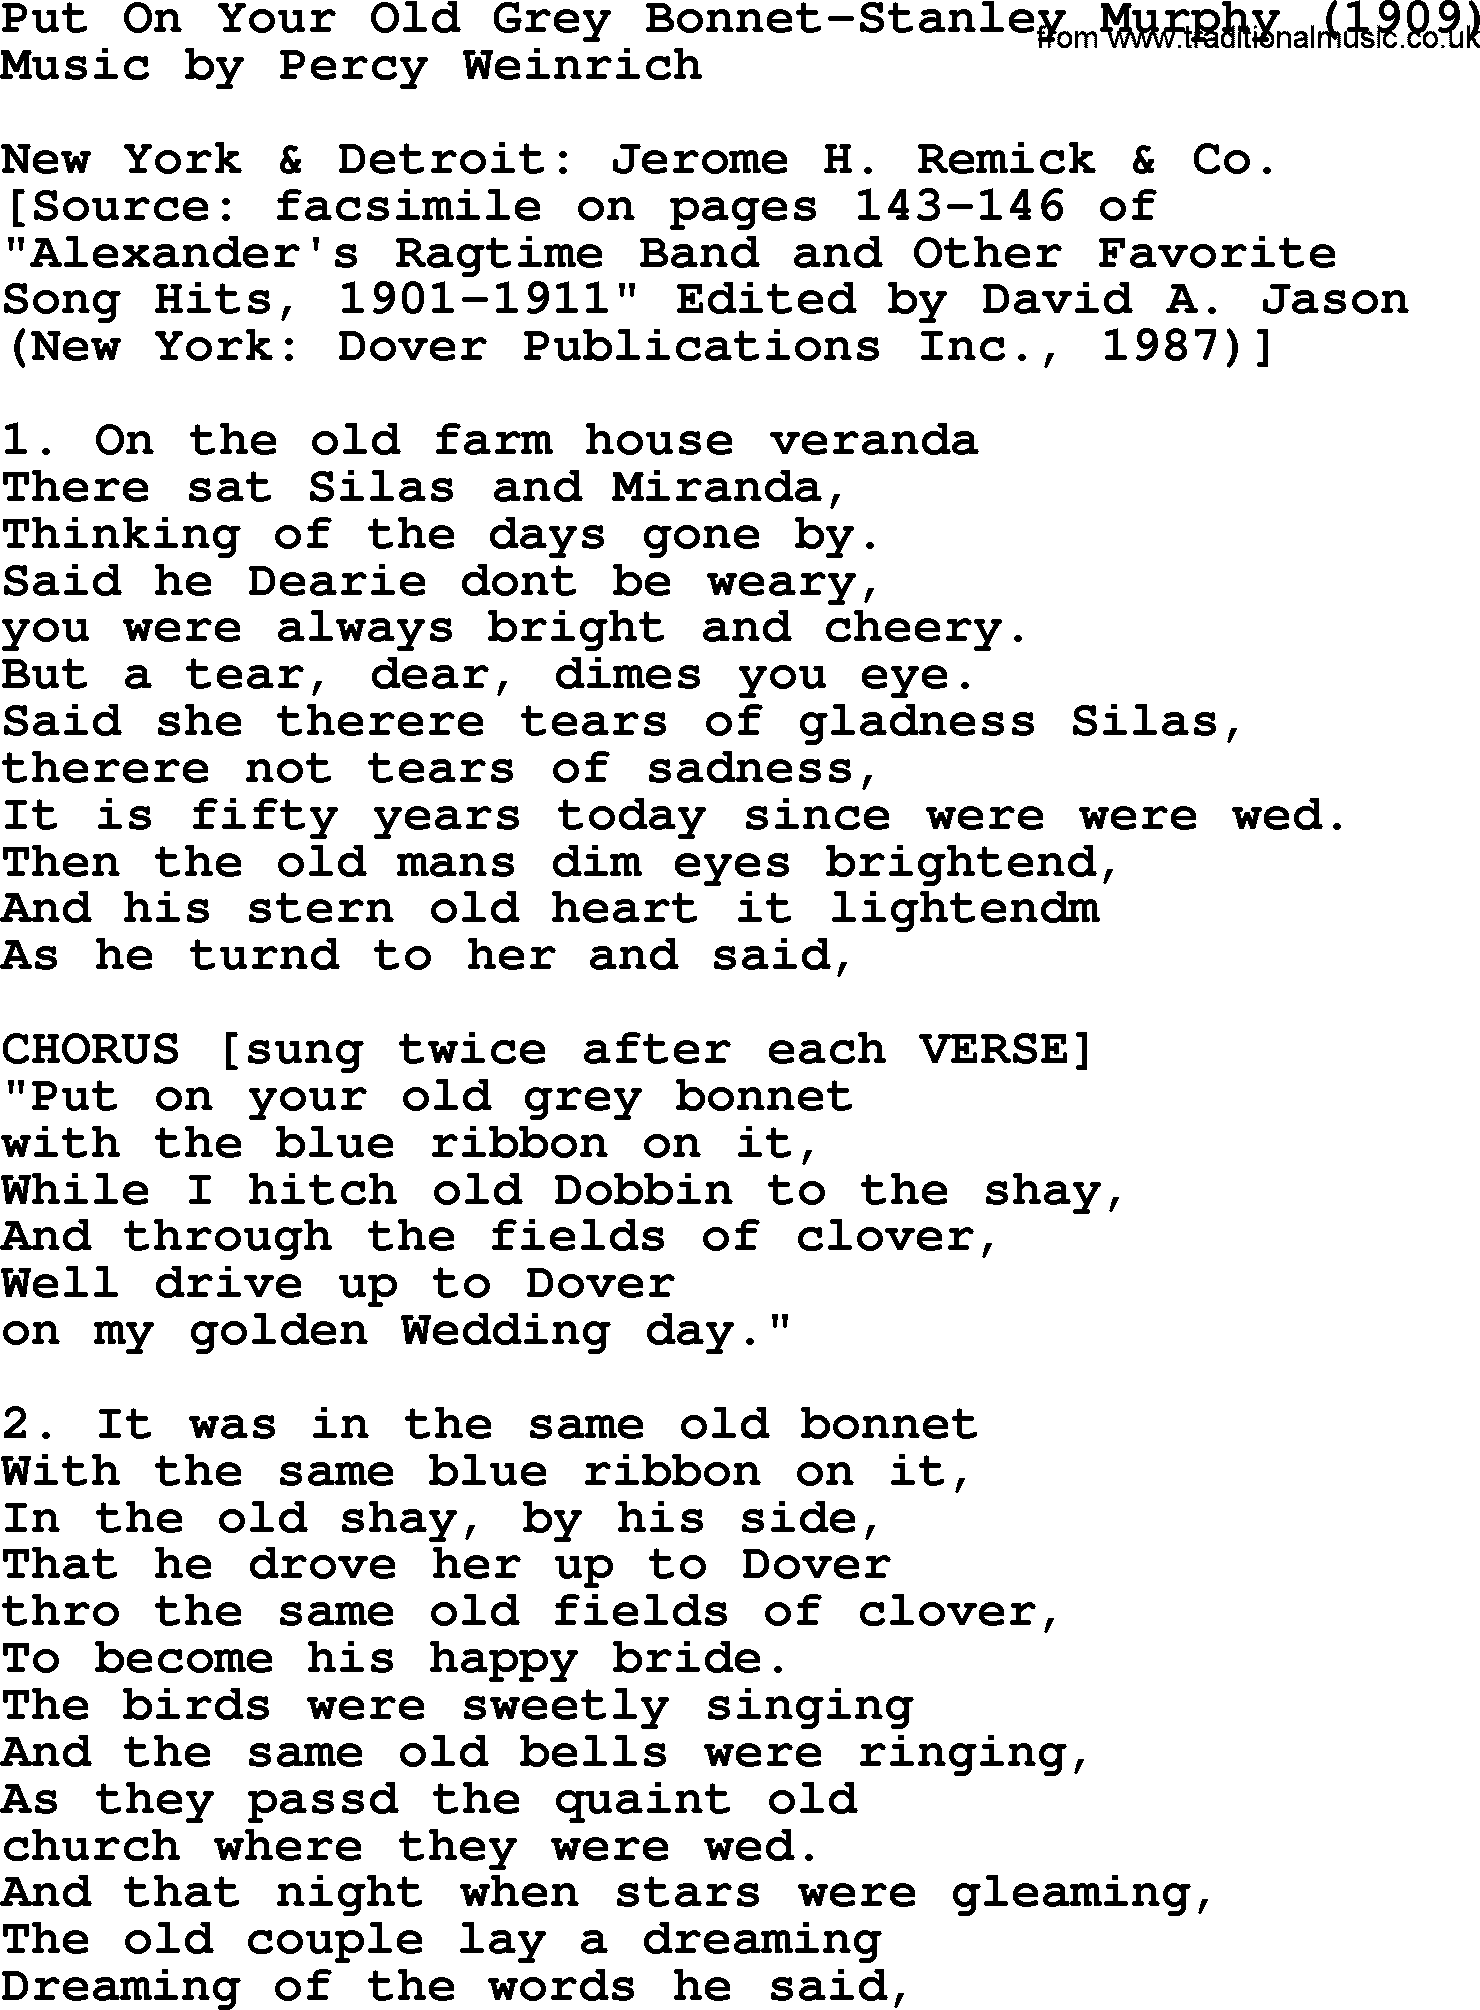 World War(WW1) One Song: Put On Your Old Grey Bonnet-Stanley Murphy 1909, lyrics and PDF